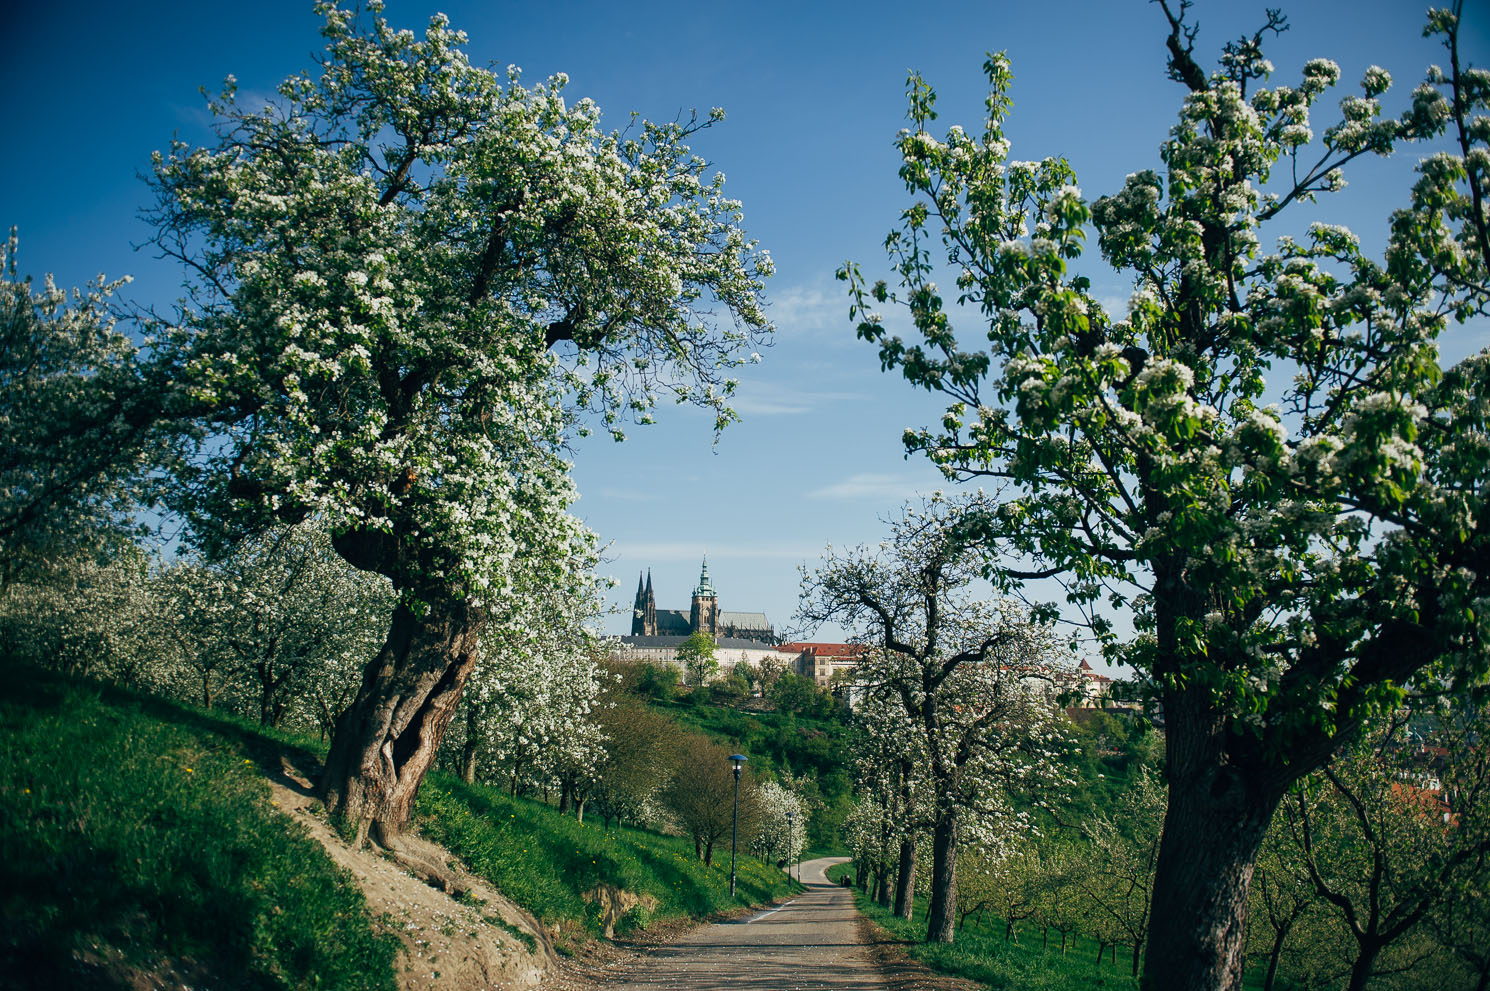 the blooming apple trees in the Petrin orchard with a view of Prague Castle in the background